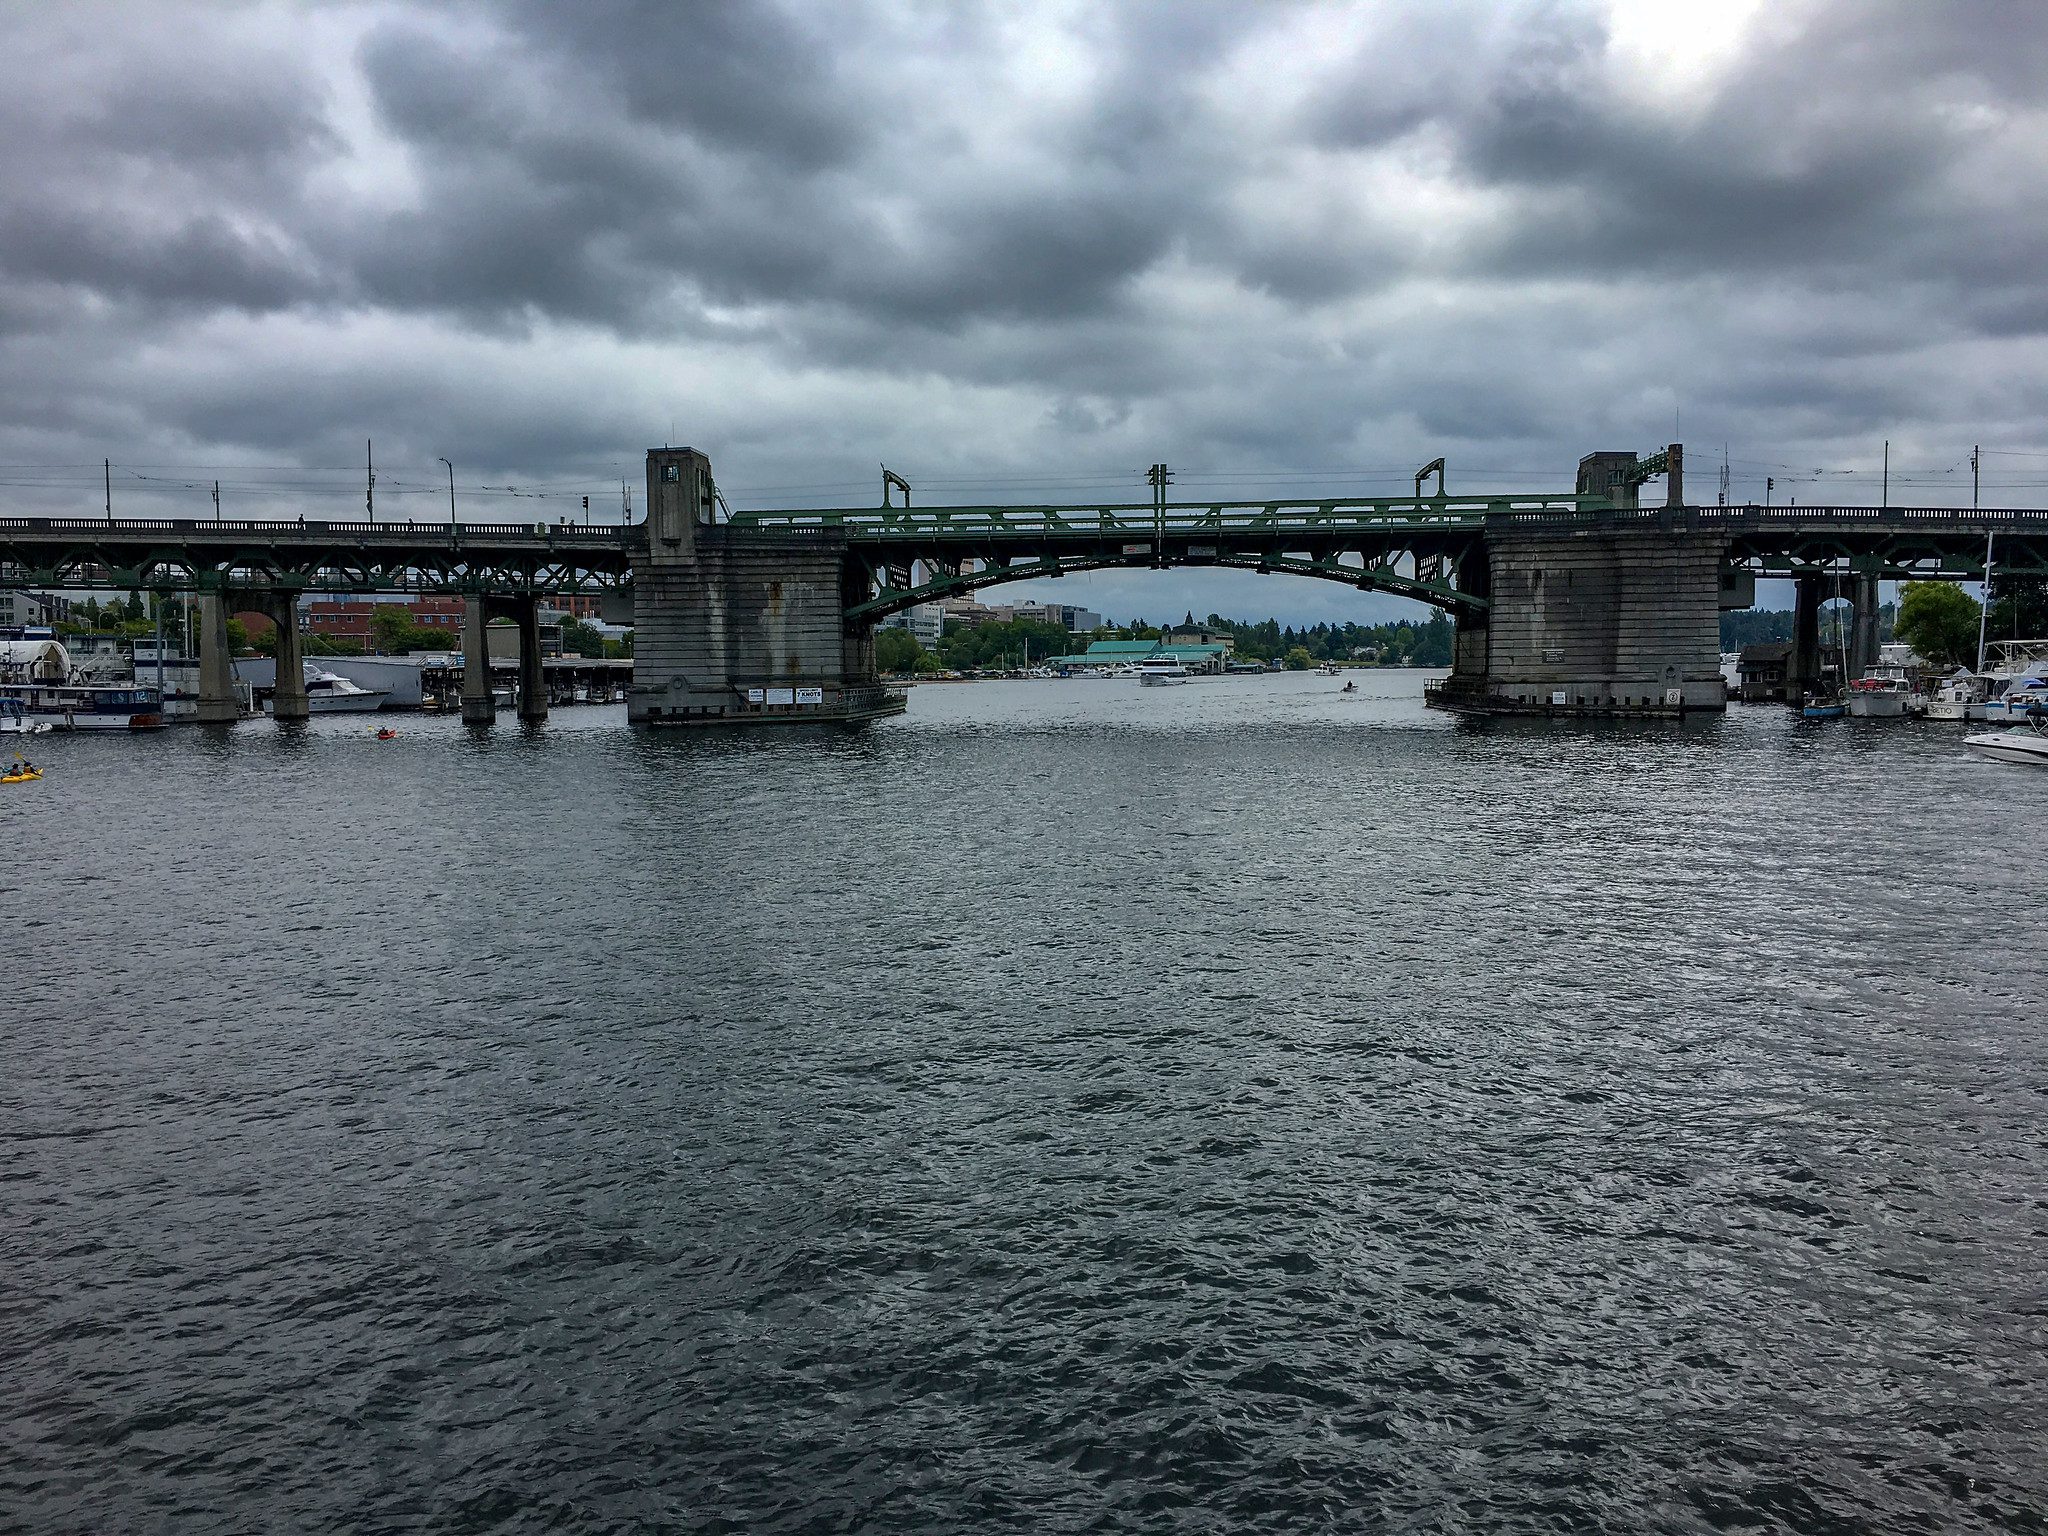 Photo of the University bridge taken from a boat on Lake Union, large body of water in front of the university bridge viewed from the side on a cloudy day.  